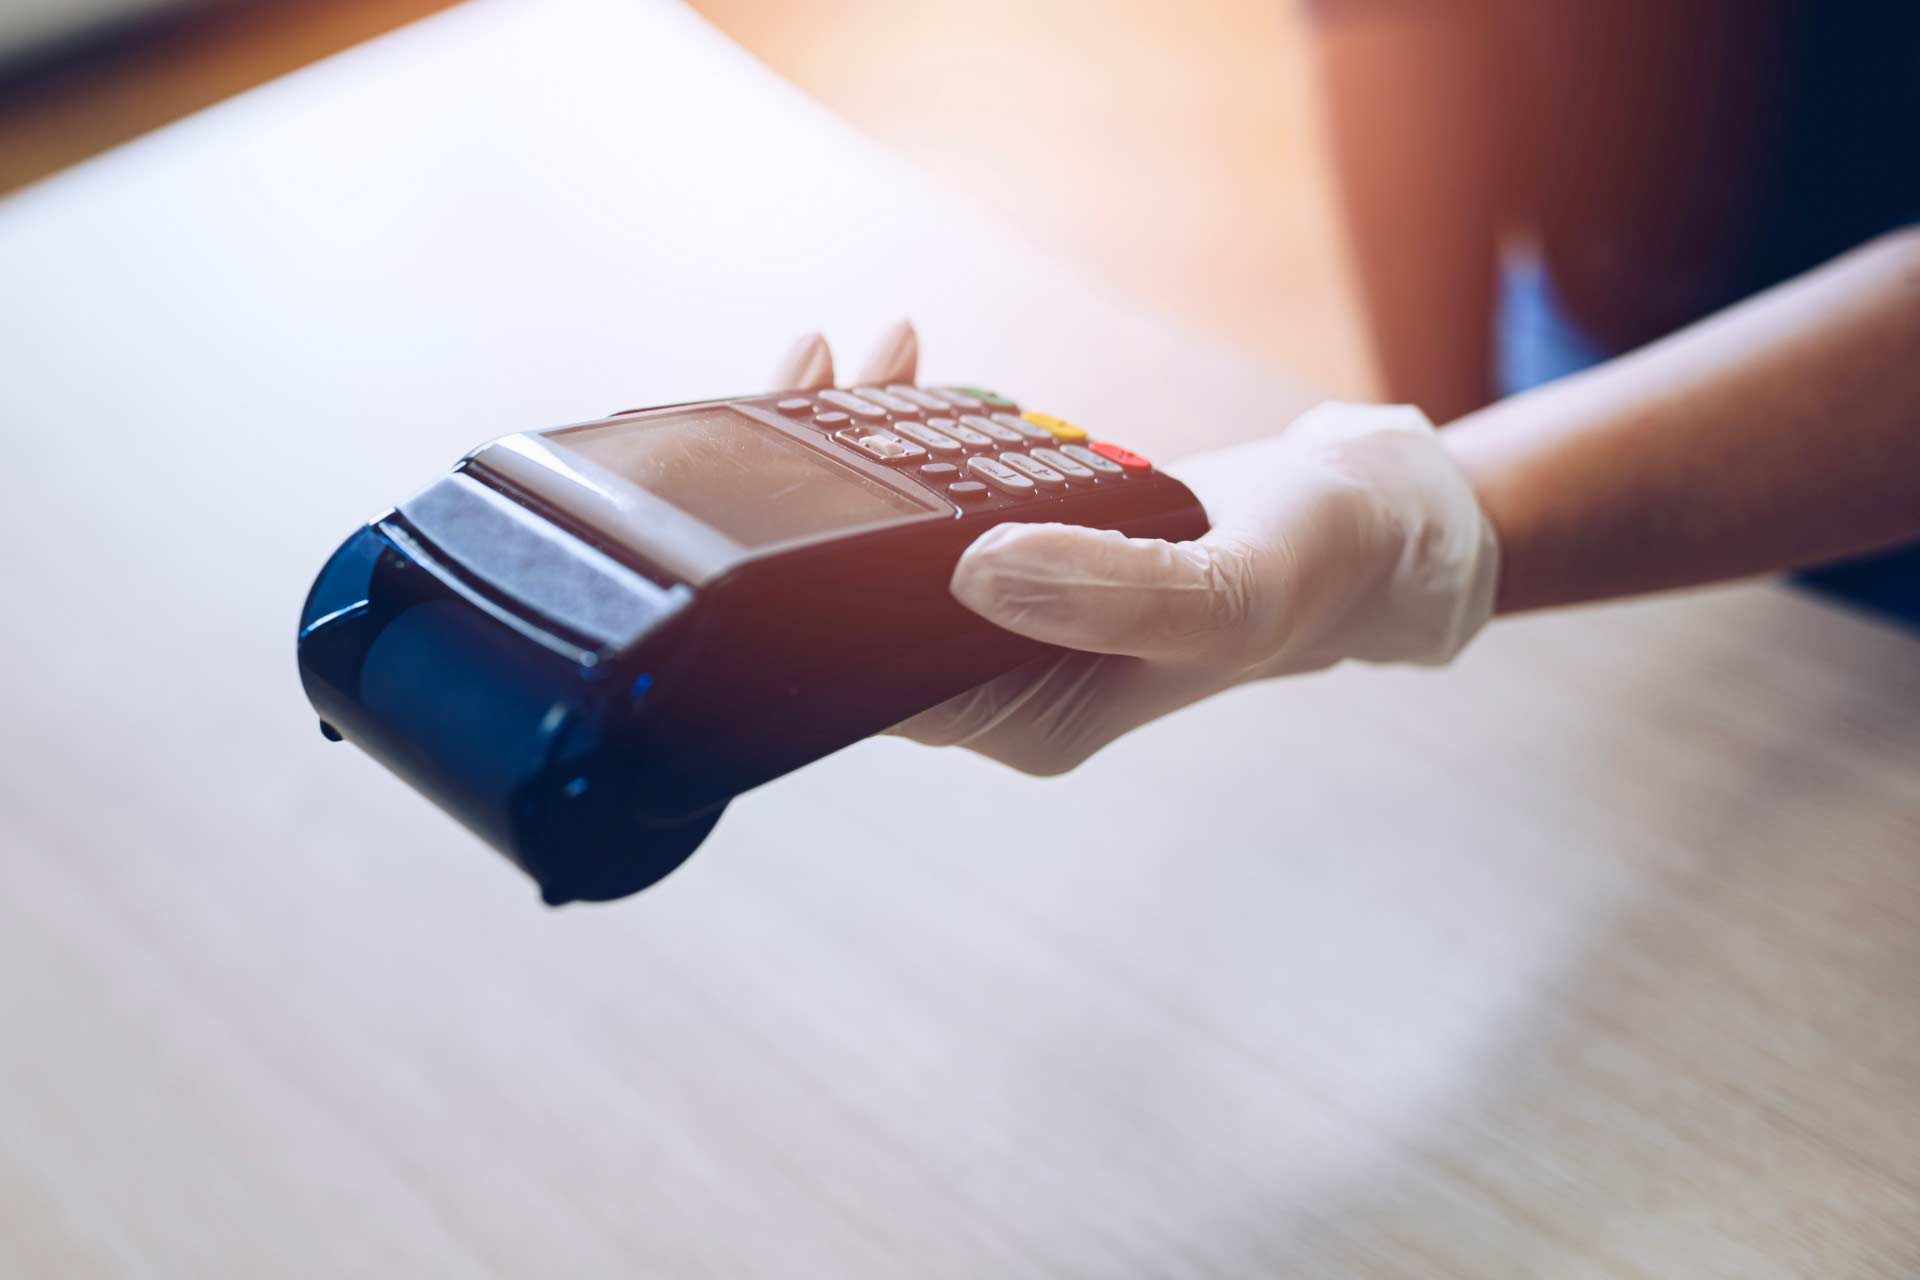 Portable credit card machine held in a gloved hand, showing precautions marijuana dispensaries take to keep customers and employees safe.